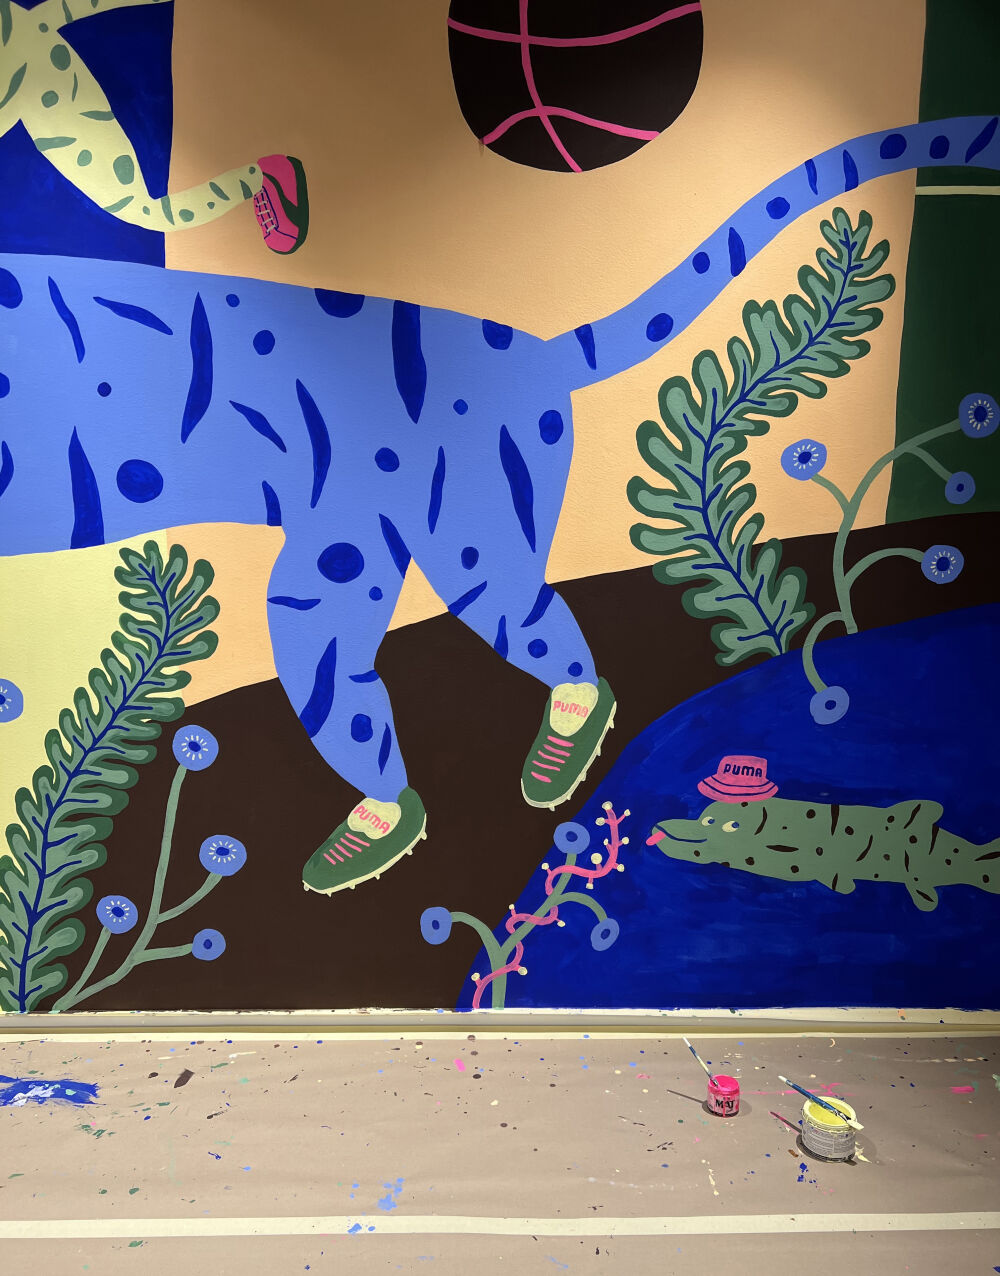 Wall mural for Puma headquarter hand-painting by Yoyo Nasty